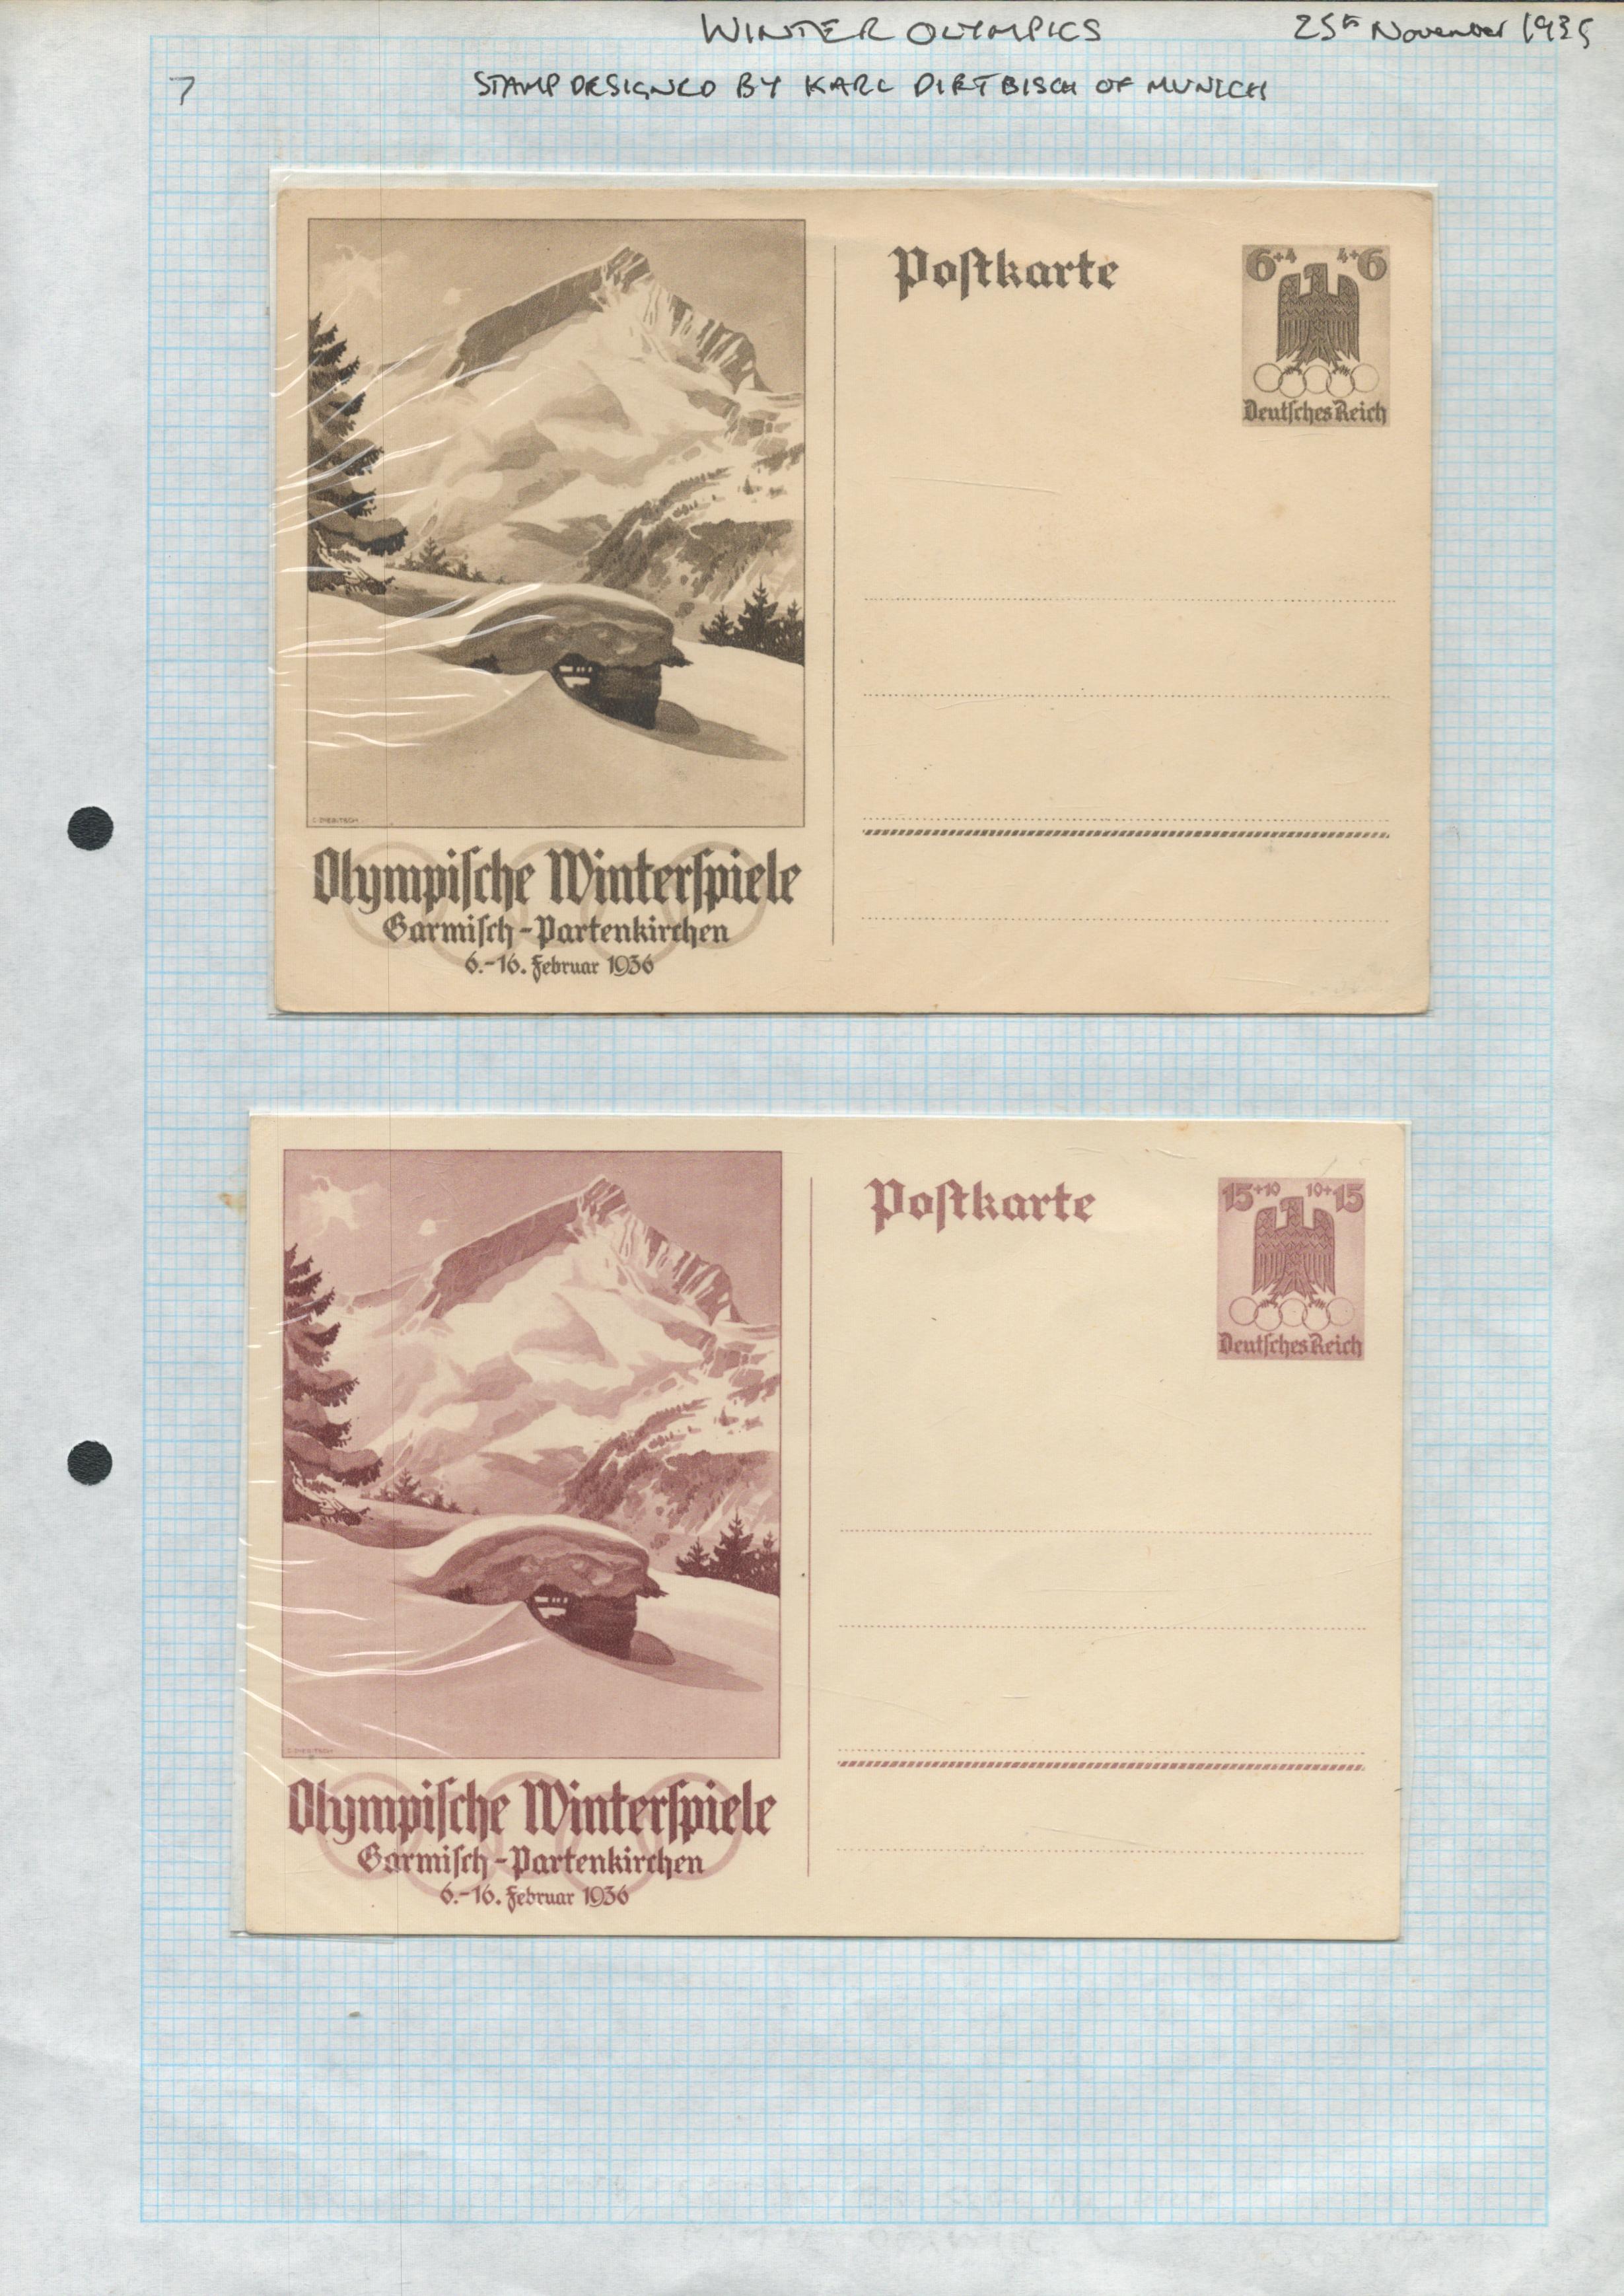 1935 OFFICIAL German TWO POSTCARDs WINTER OLYMPICS Rare Issued on 25th November 1935 these two